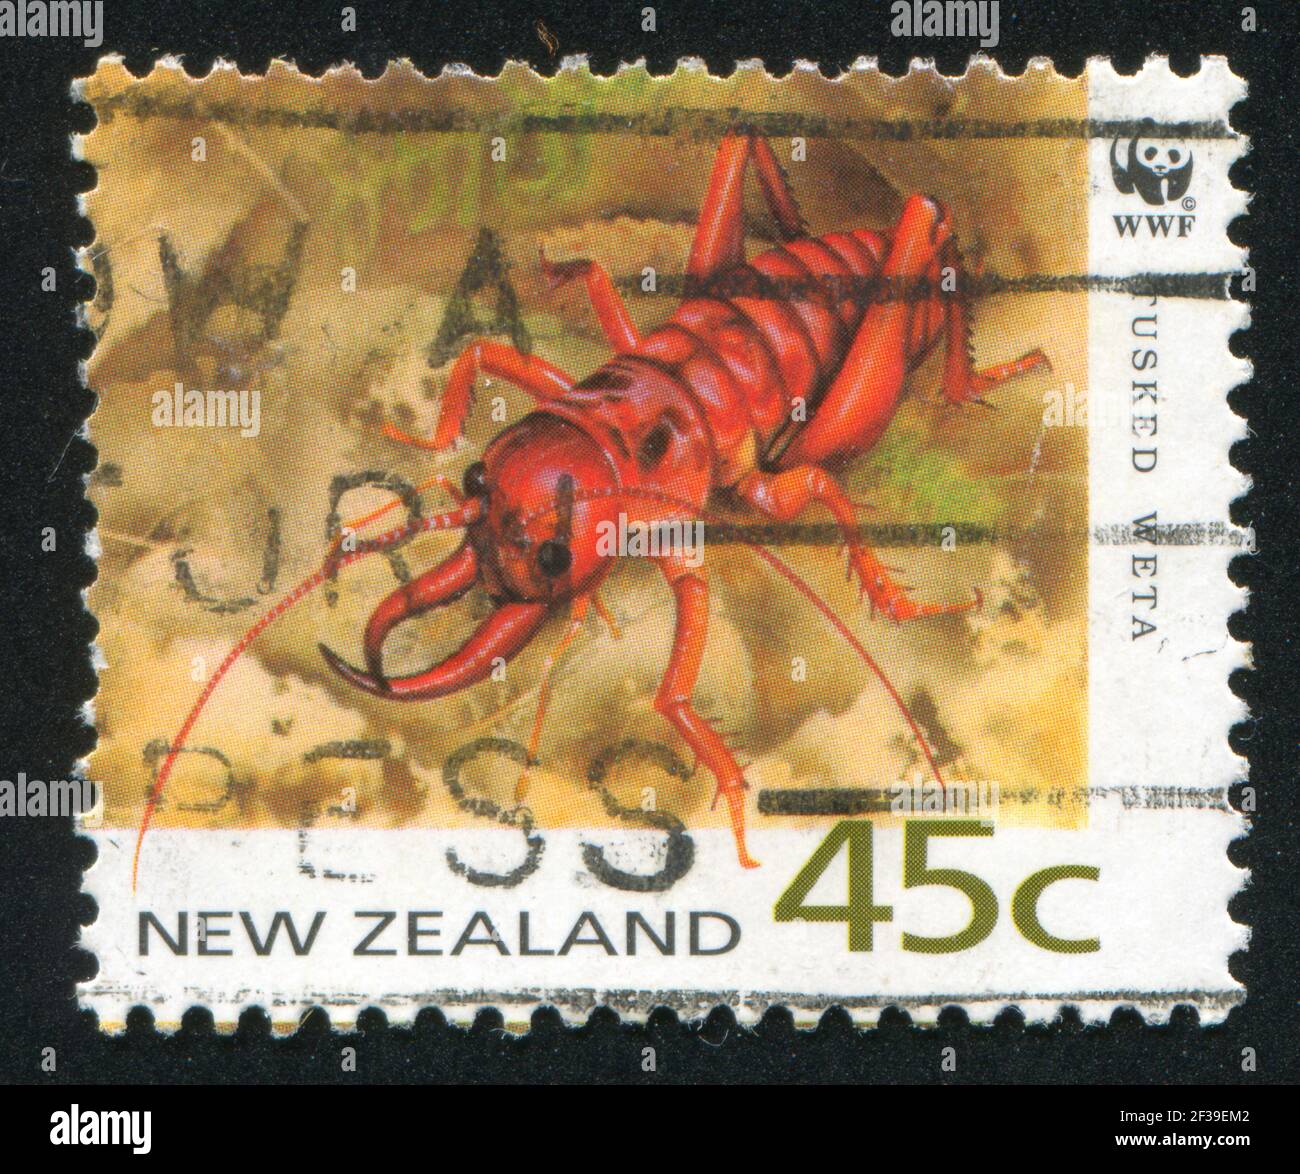 NEW ZEALAND - CIRCA 1993: stamp printed by New Zealand, shows Tusked Weta, circa 1993 Stock Photo